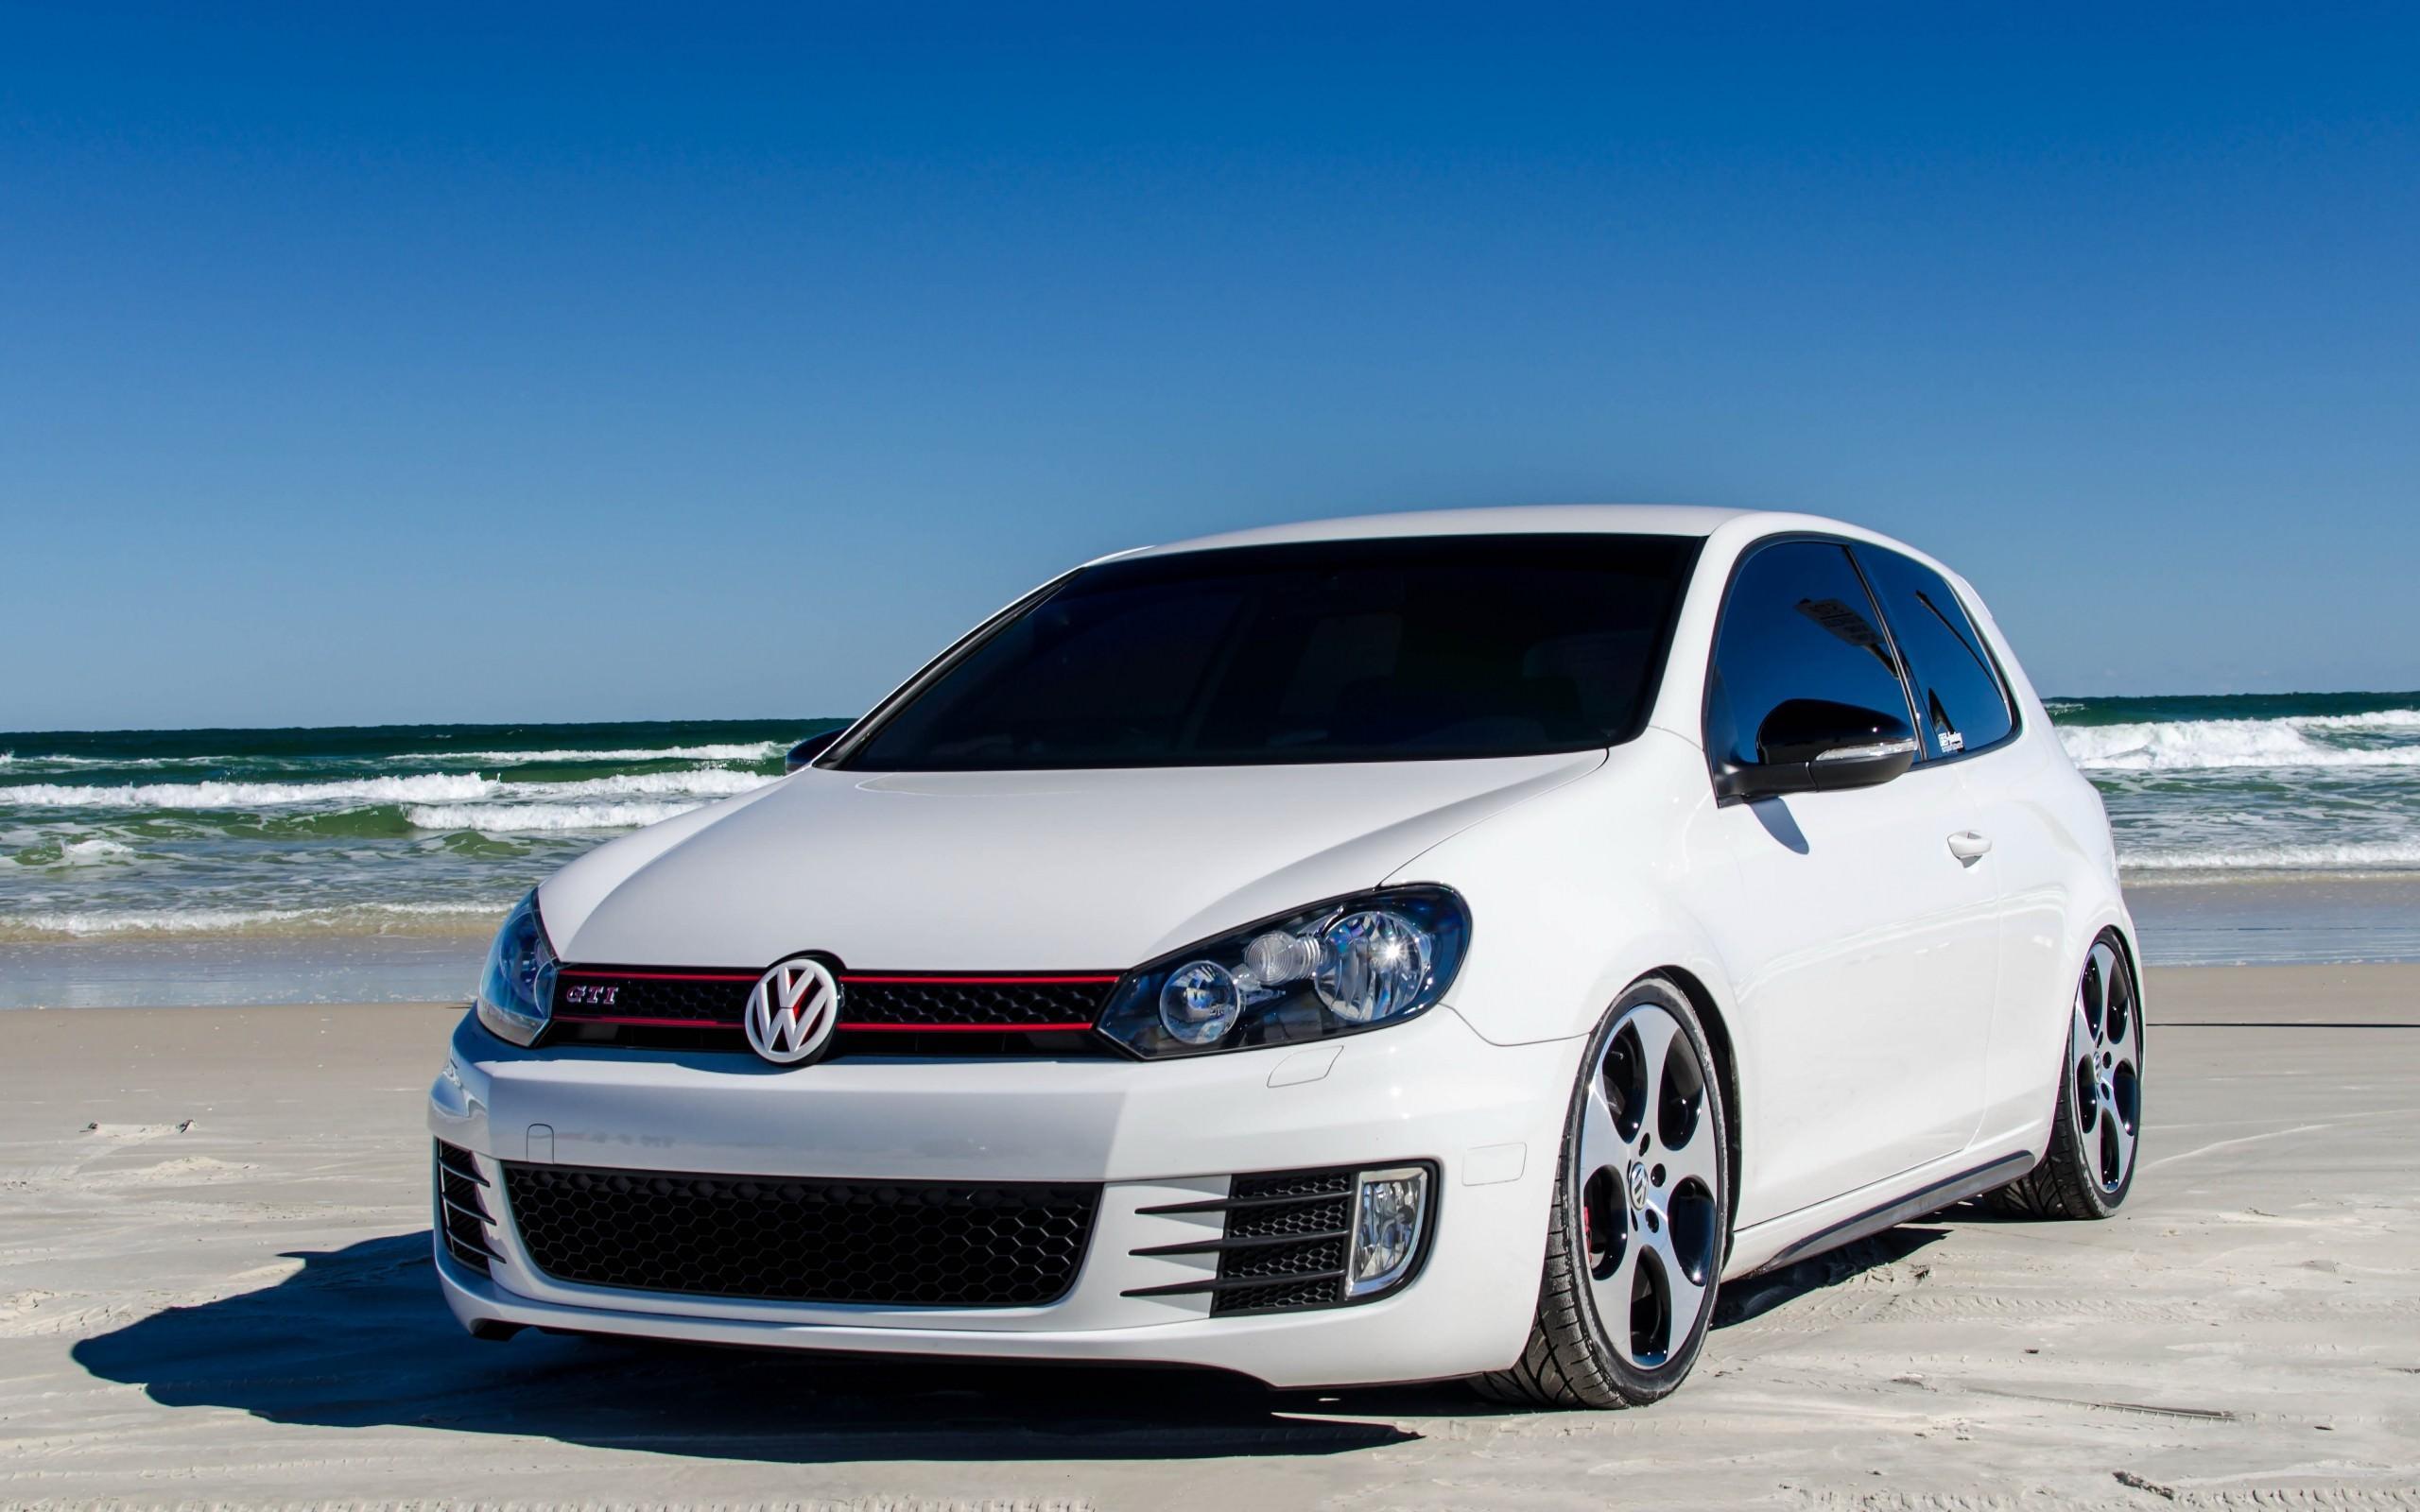 White Volkswagen Golf Mk6 GTI on the beach wallpaper and image